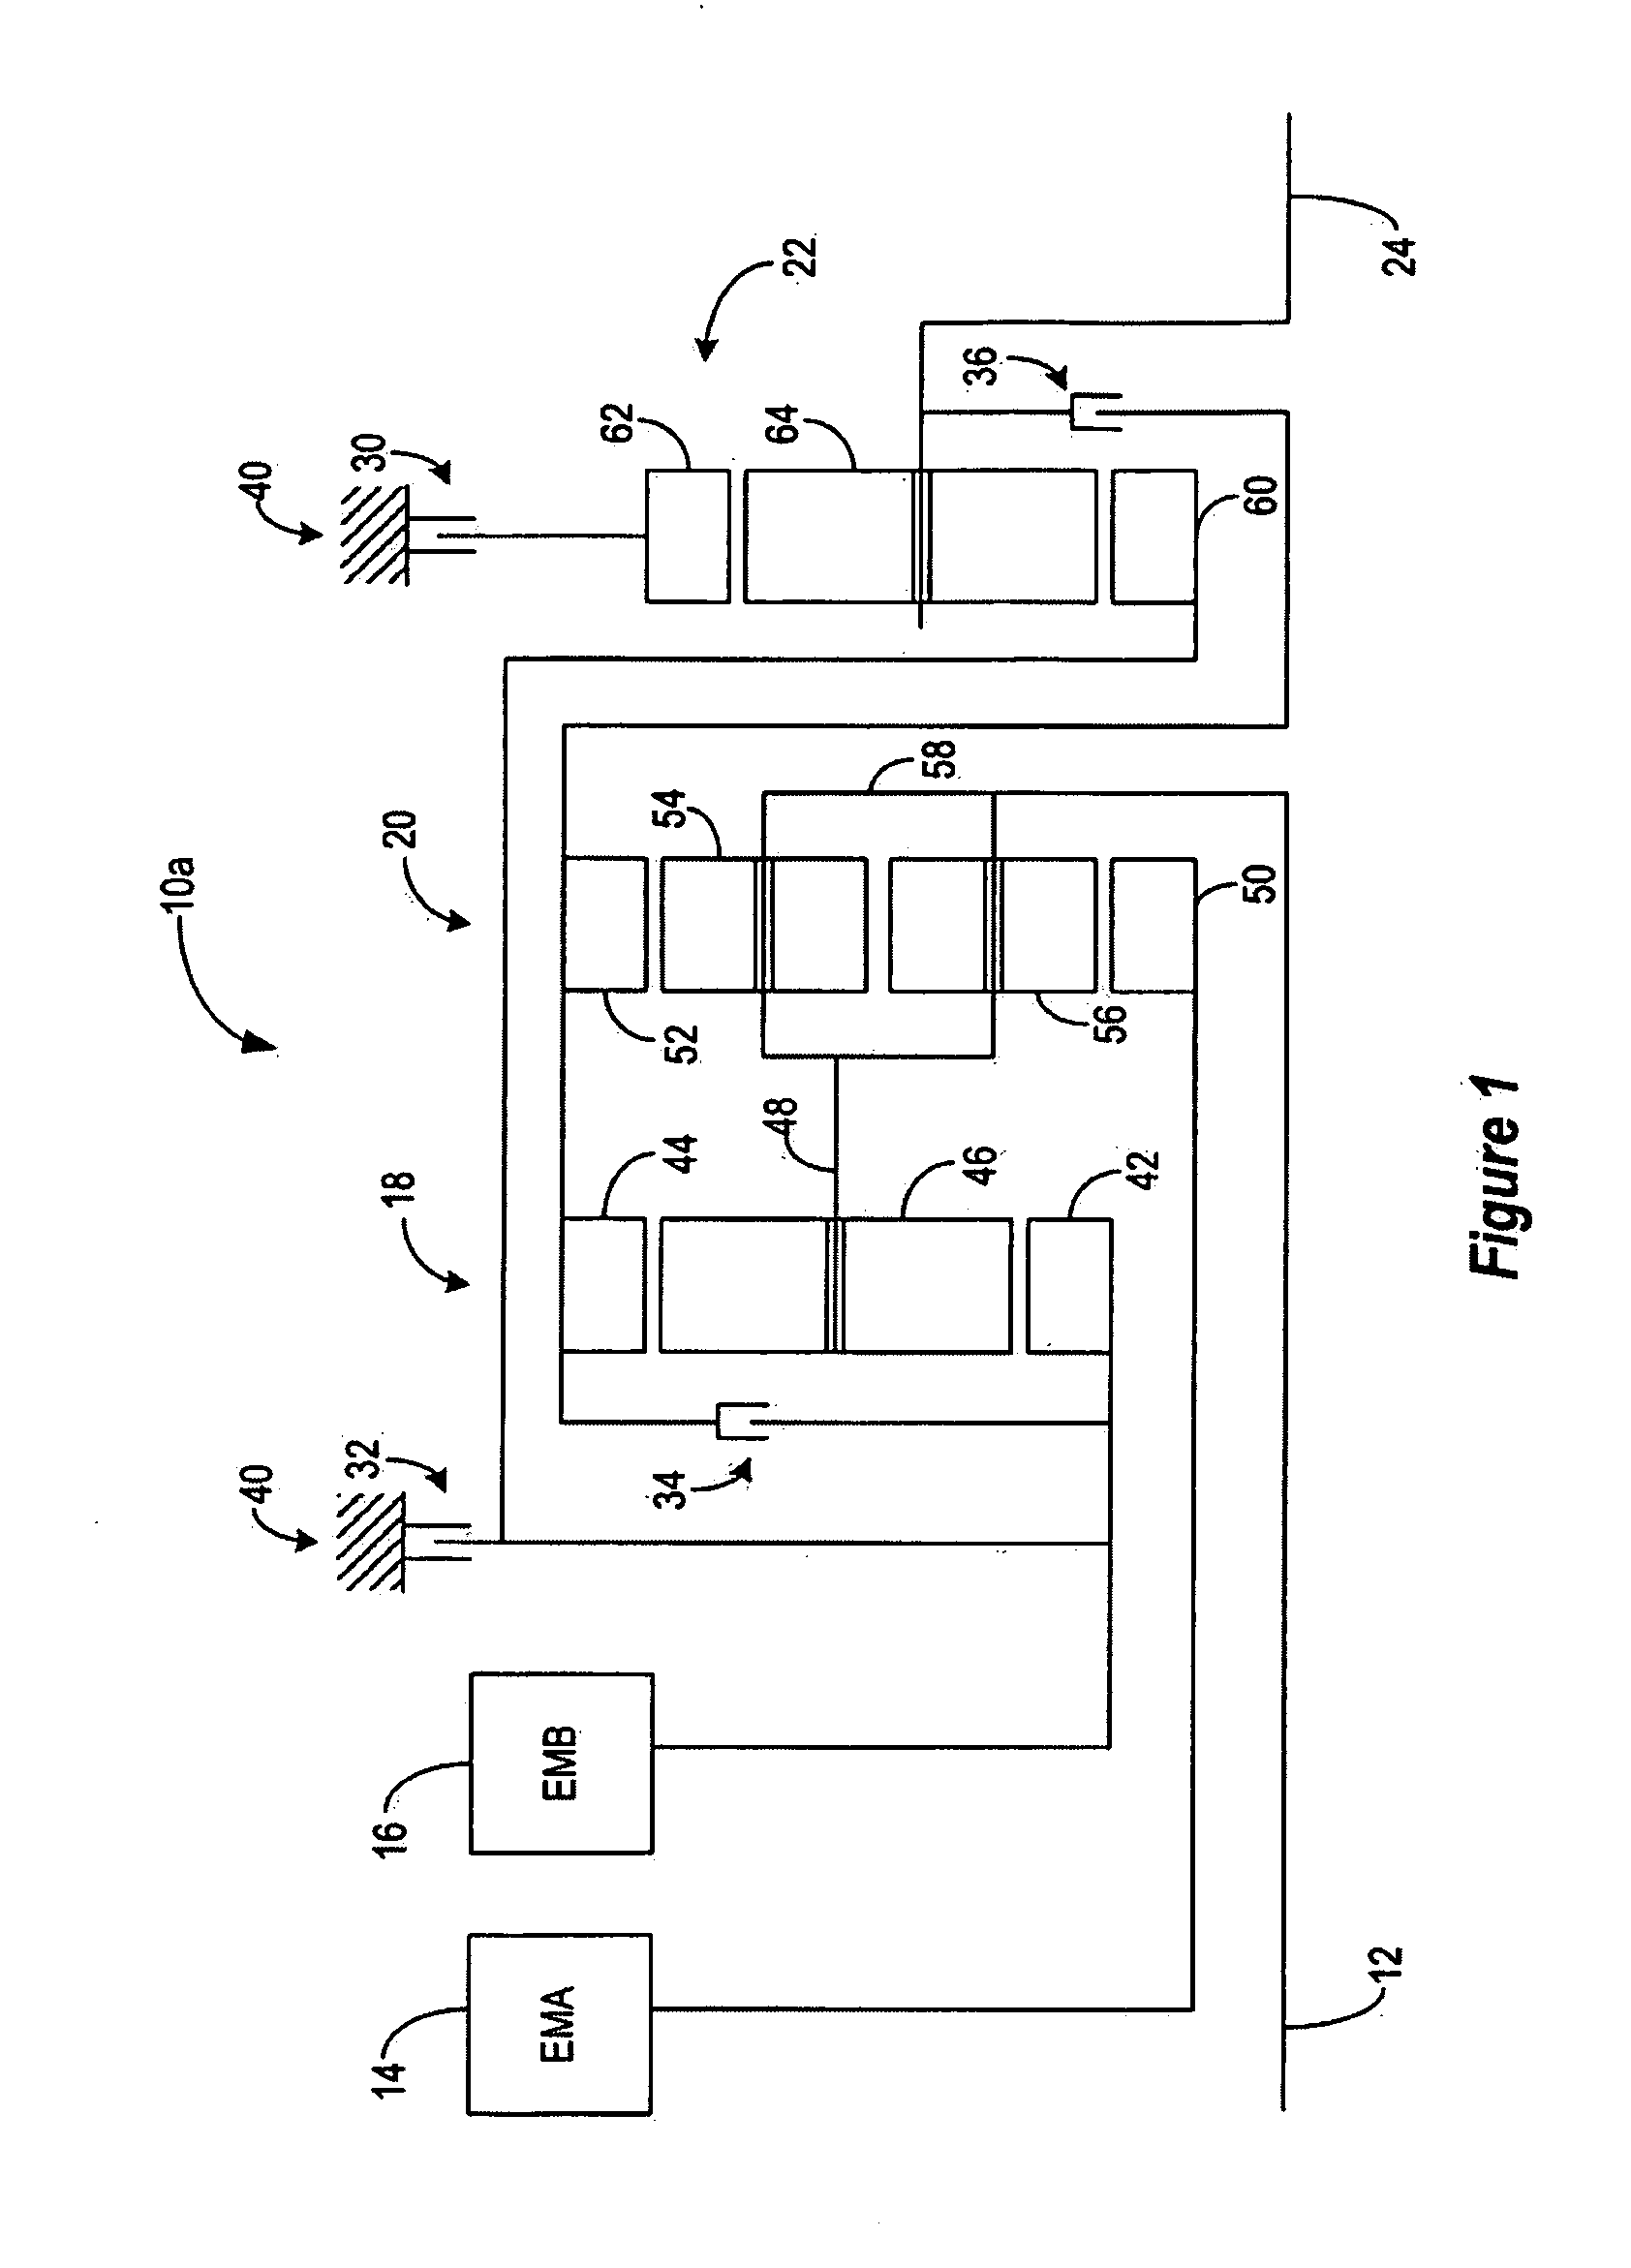 Electric variable transmission for hybrid electric vehicles with two forward modes and four fixed gears